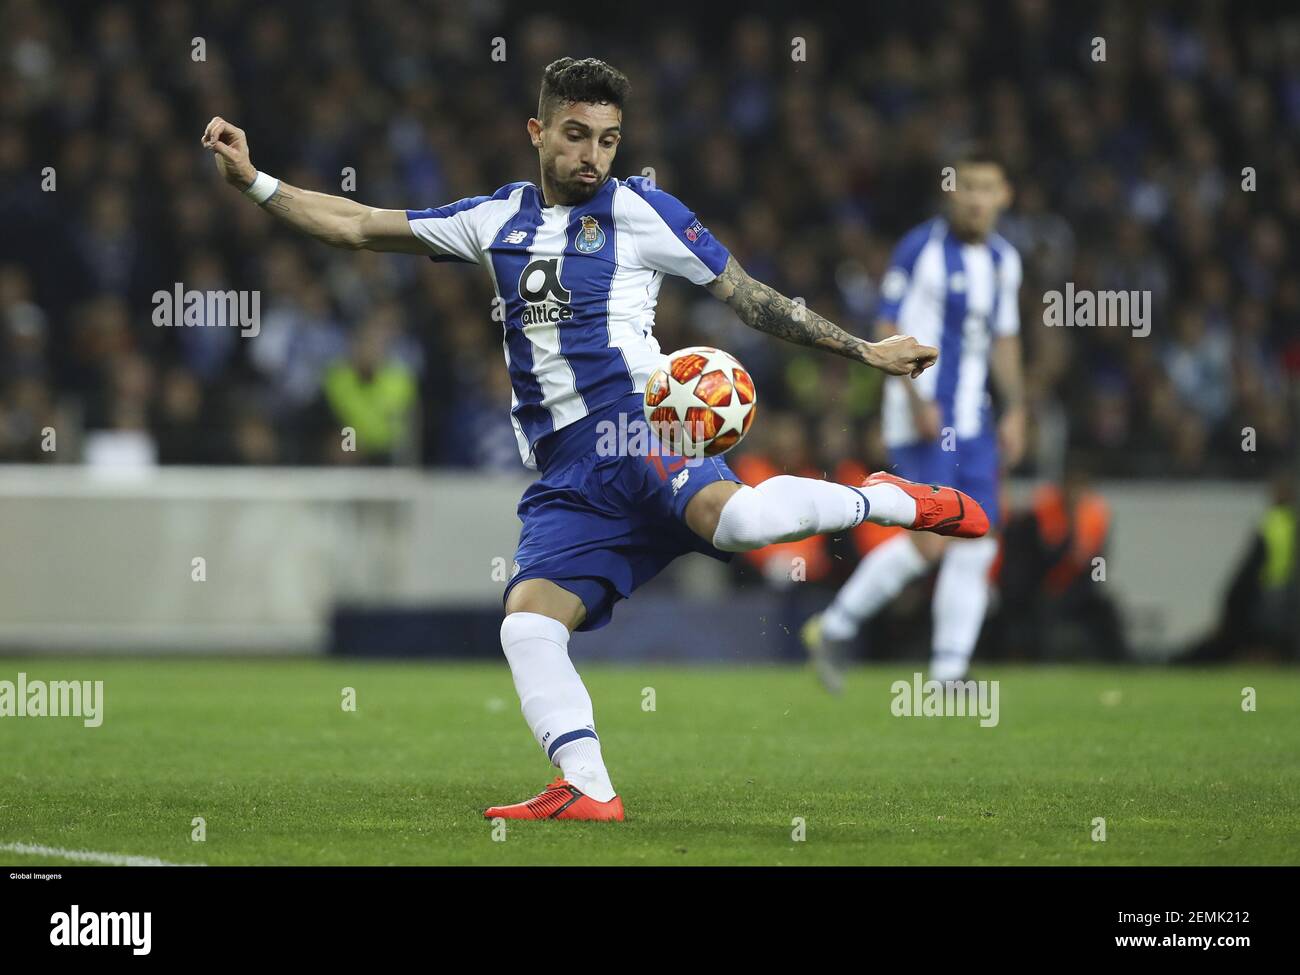 Porto, 03/06/2019 - FC Porto received this evening at the EstÃ¡dio do  Dragão for AS Roma in the second leg of the 2018/19 Champions League first  knockout round. Alex Telles (FÃ¡bio Poço /